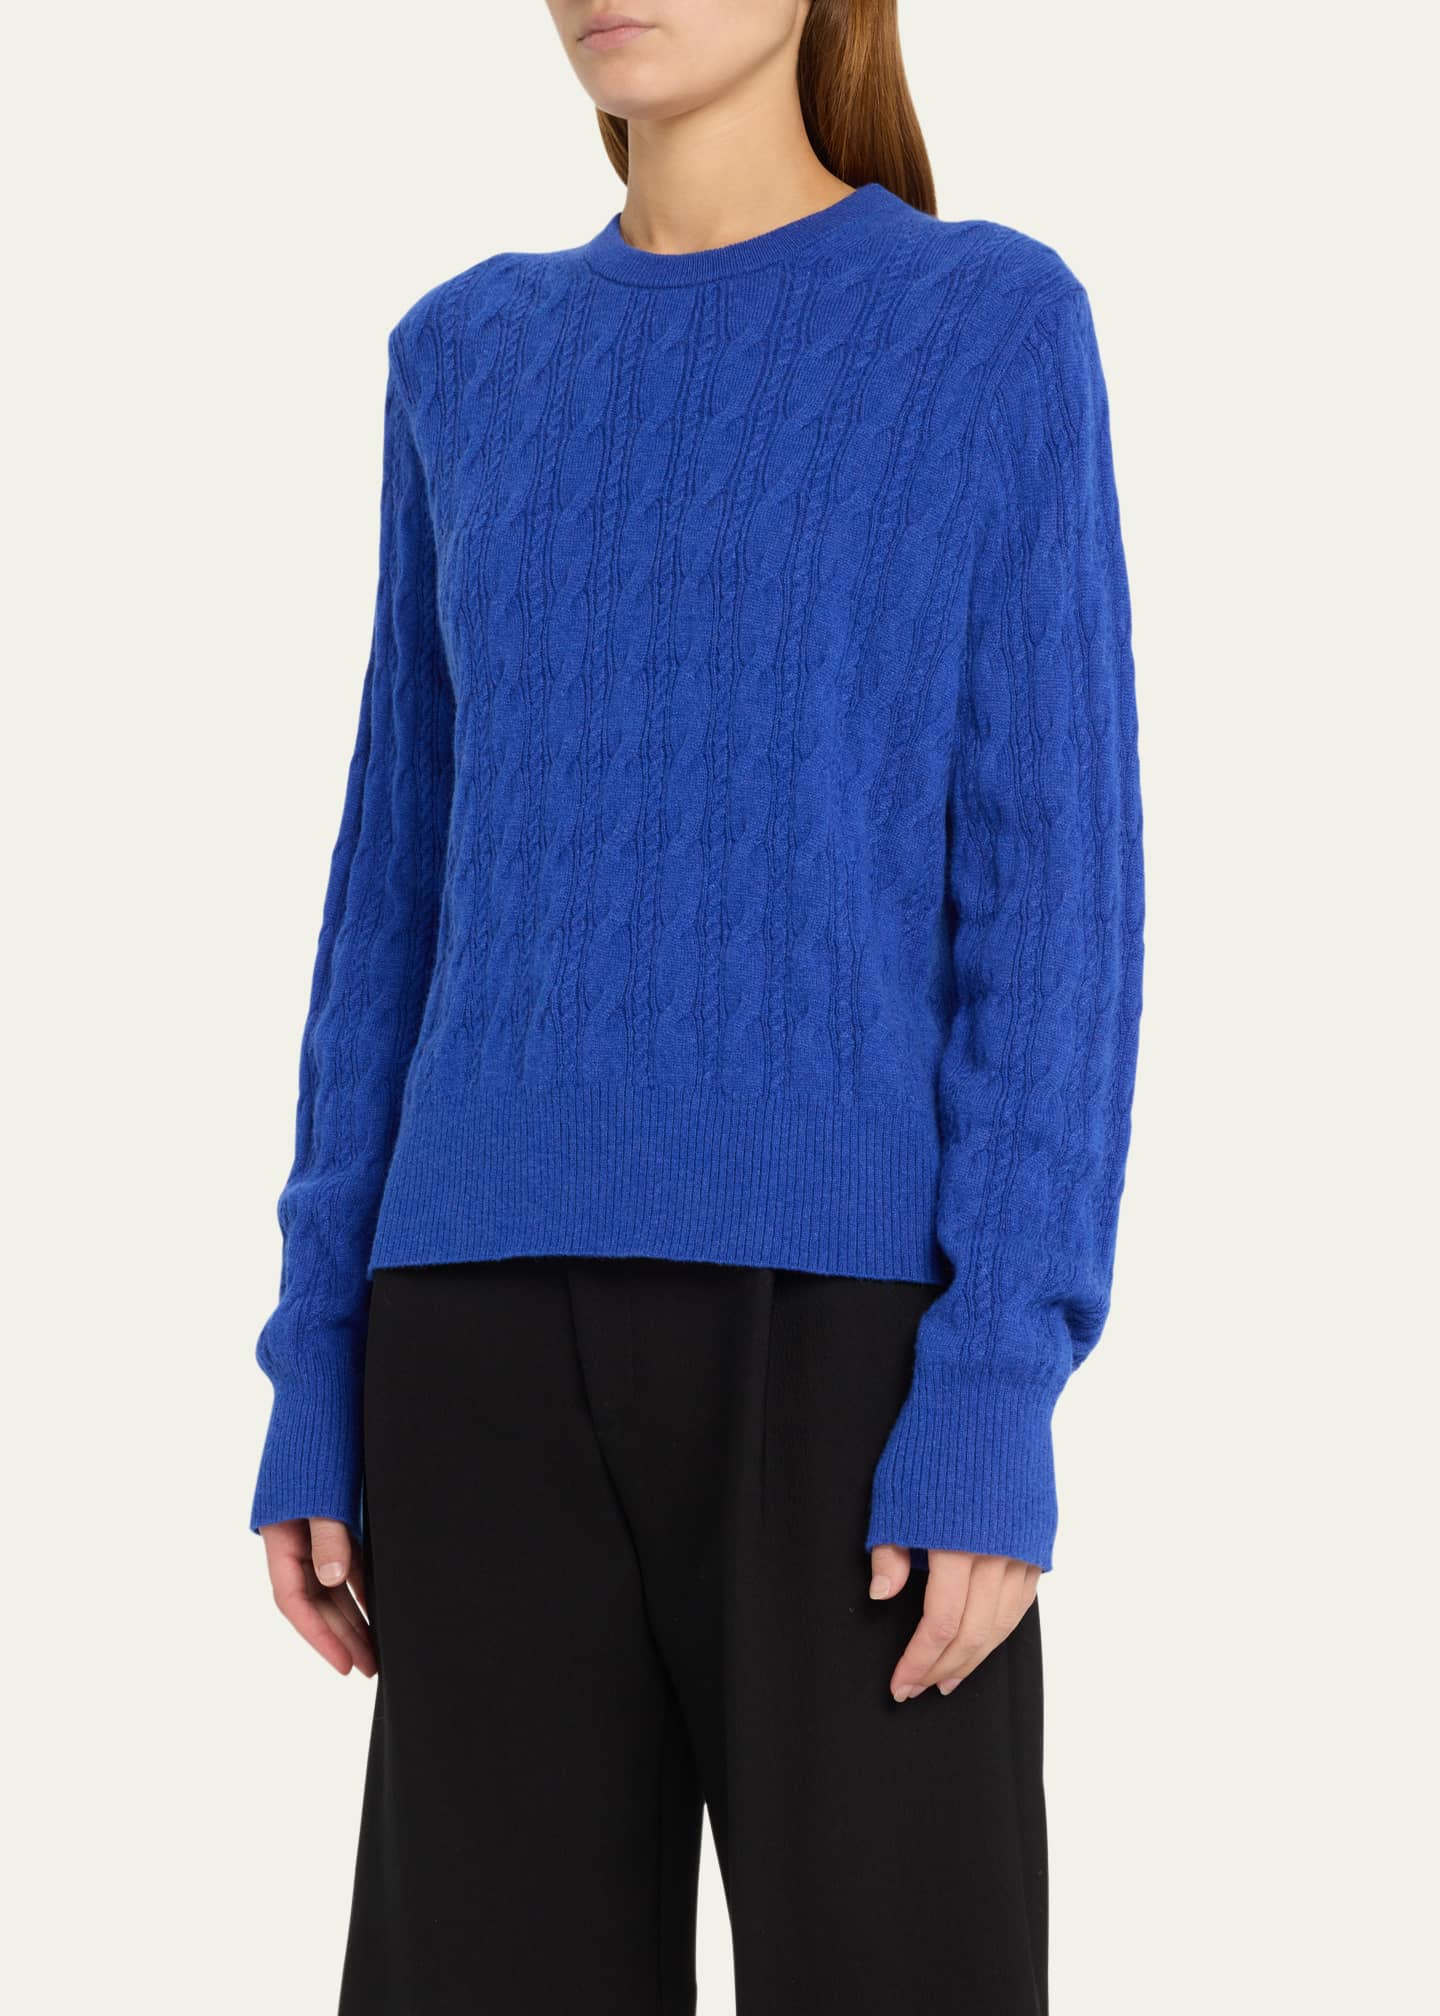 Guest in Residence Cashmere Cable-Knit Crewneck Sweater - Bergdorf Goodman